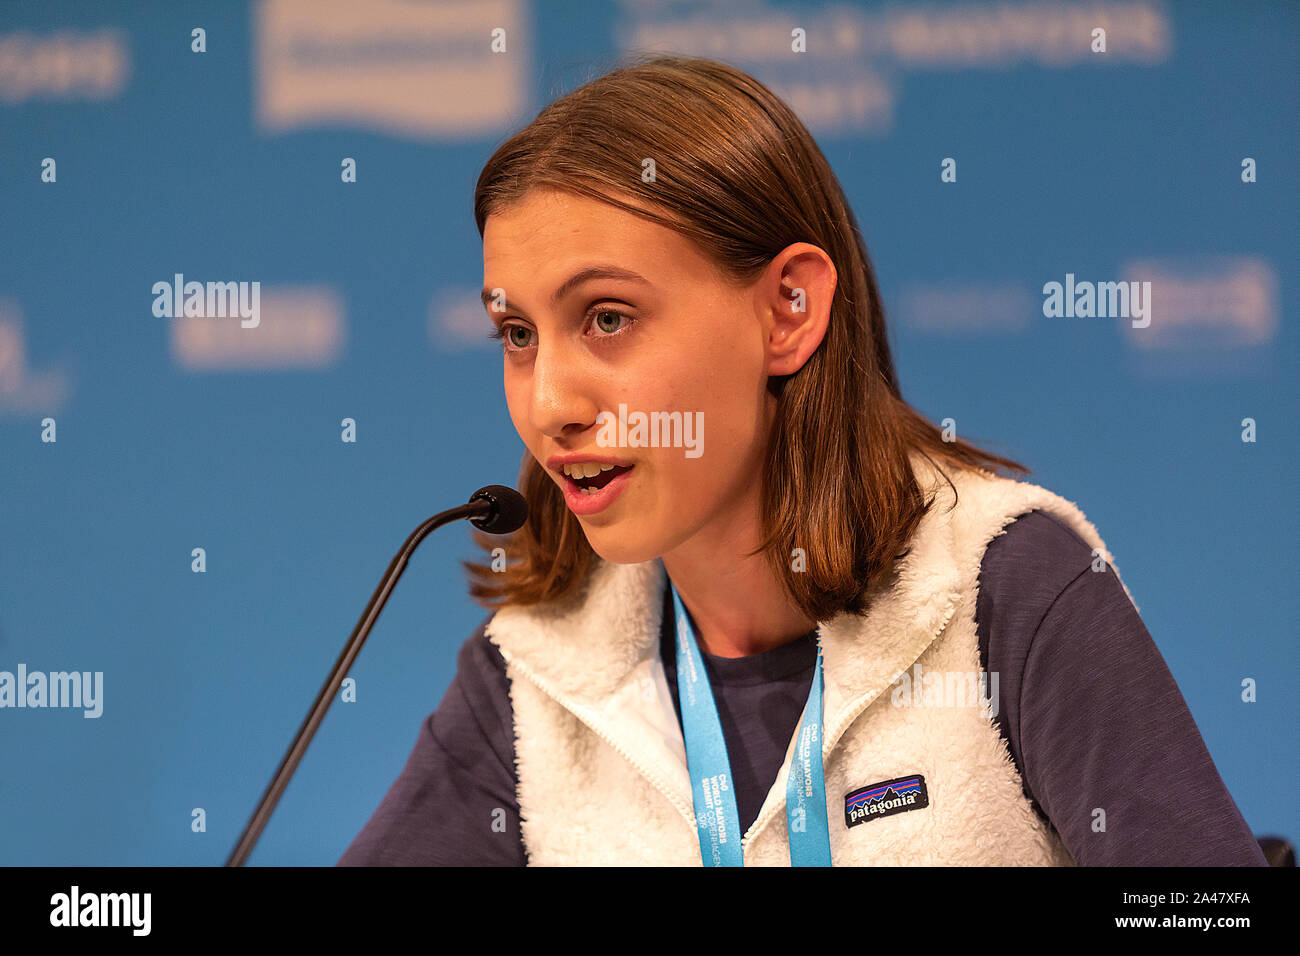 COPENHAGEN, DENMARK – OCTOBER 11, 2019:  Alexandria Villaseñor, climate activists within the ‘Fridays for Future’ movement, New York, USA, speaks at the ‘Mayors and Youth Activist’ press conference at the C40 World Mayors Summit.  During the press conference young activist explained what they expect of the grown-up politicians. More than 90 mayors of some of the world’s largest and most influential cities representing some 700 million people meet in Copenhagen from October 9-12 for the C40 World Mayors Summit. The purpose with the summit in Copenhagen is to build a global coalition of leading Stock Photo